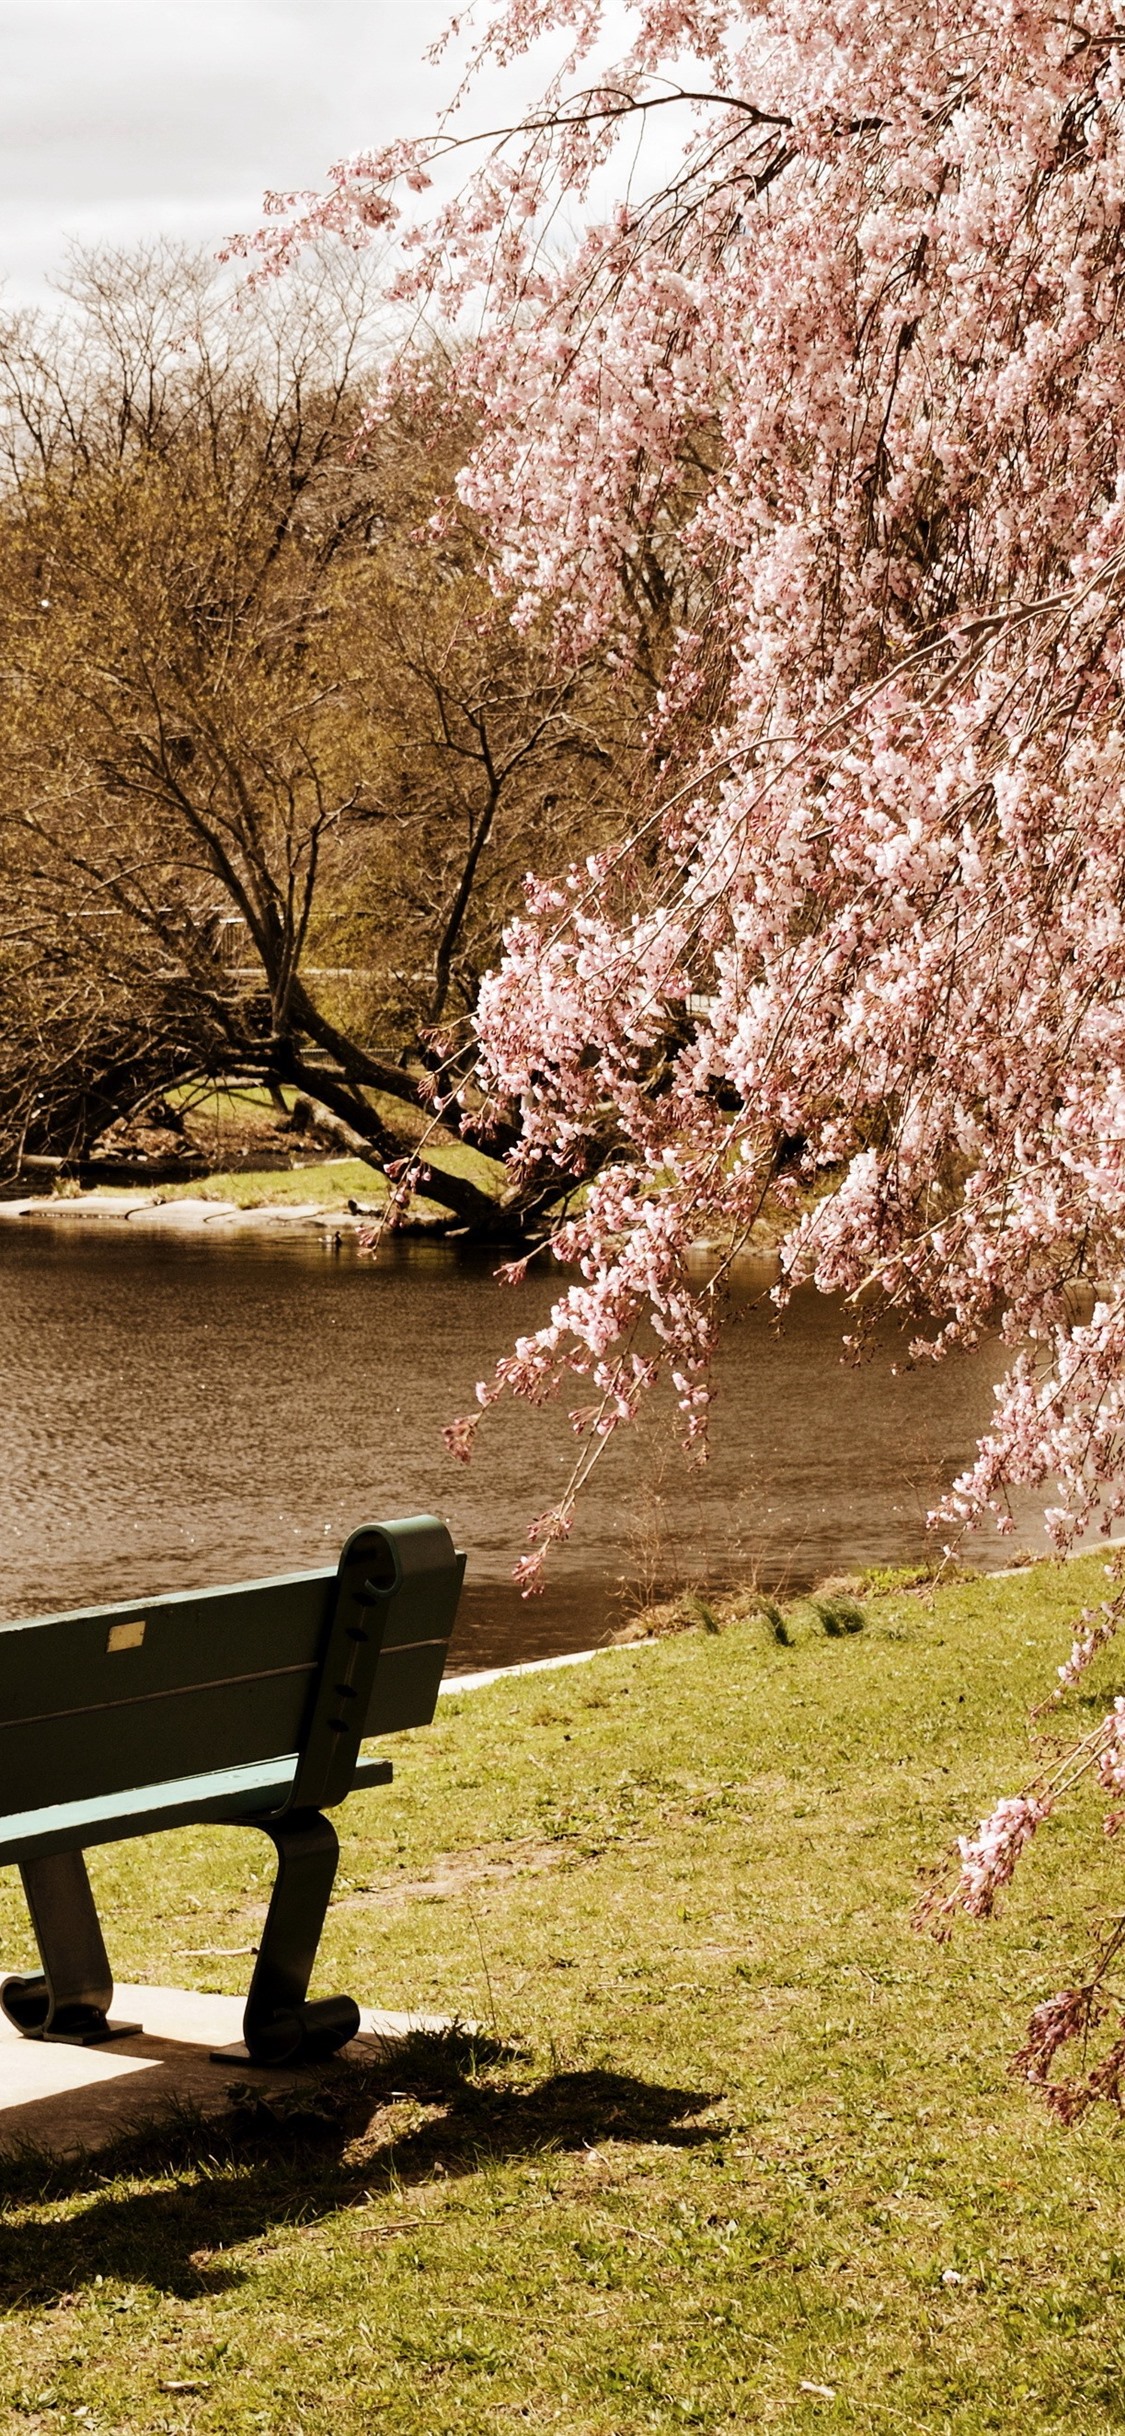 Spring, Tree Flowers Bloom, Pond, Park, Bench 1125x2436 IPhone 11 Pro XS X Wallpaper, Background, Picture, Image